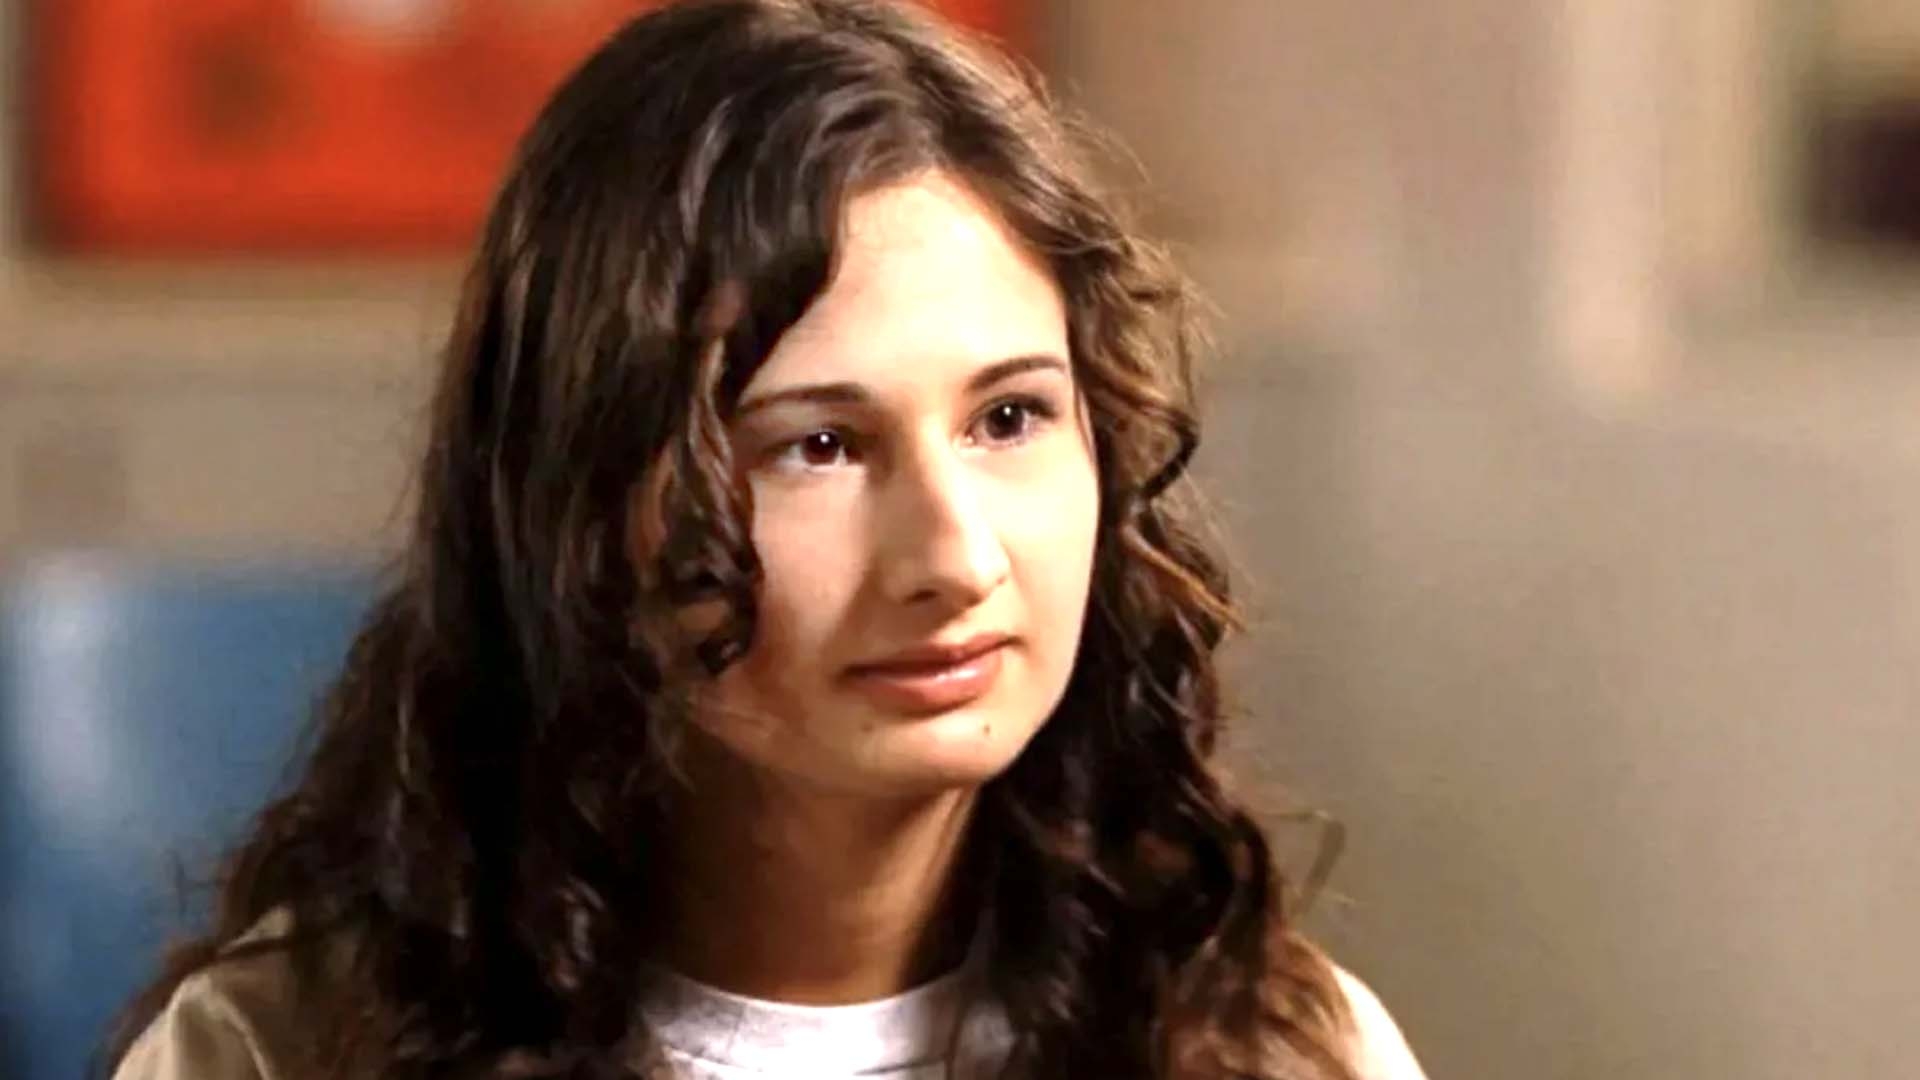 Gypsy Rose Blanchard: Her Net Worth, Husband And Back Story